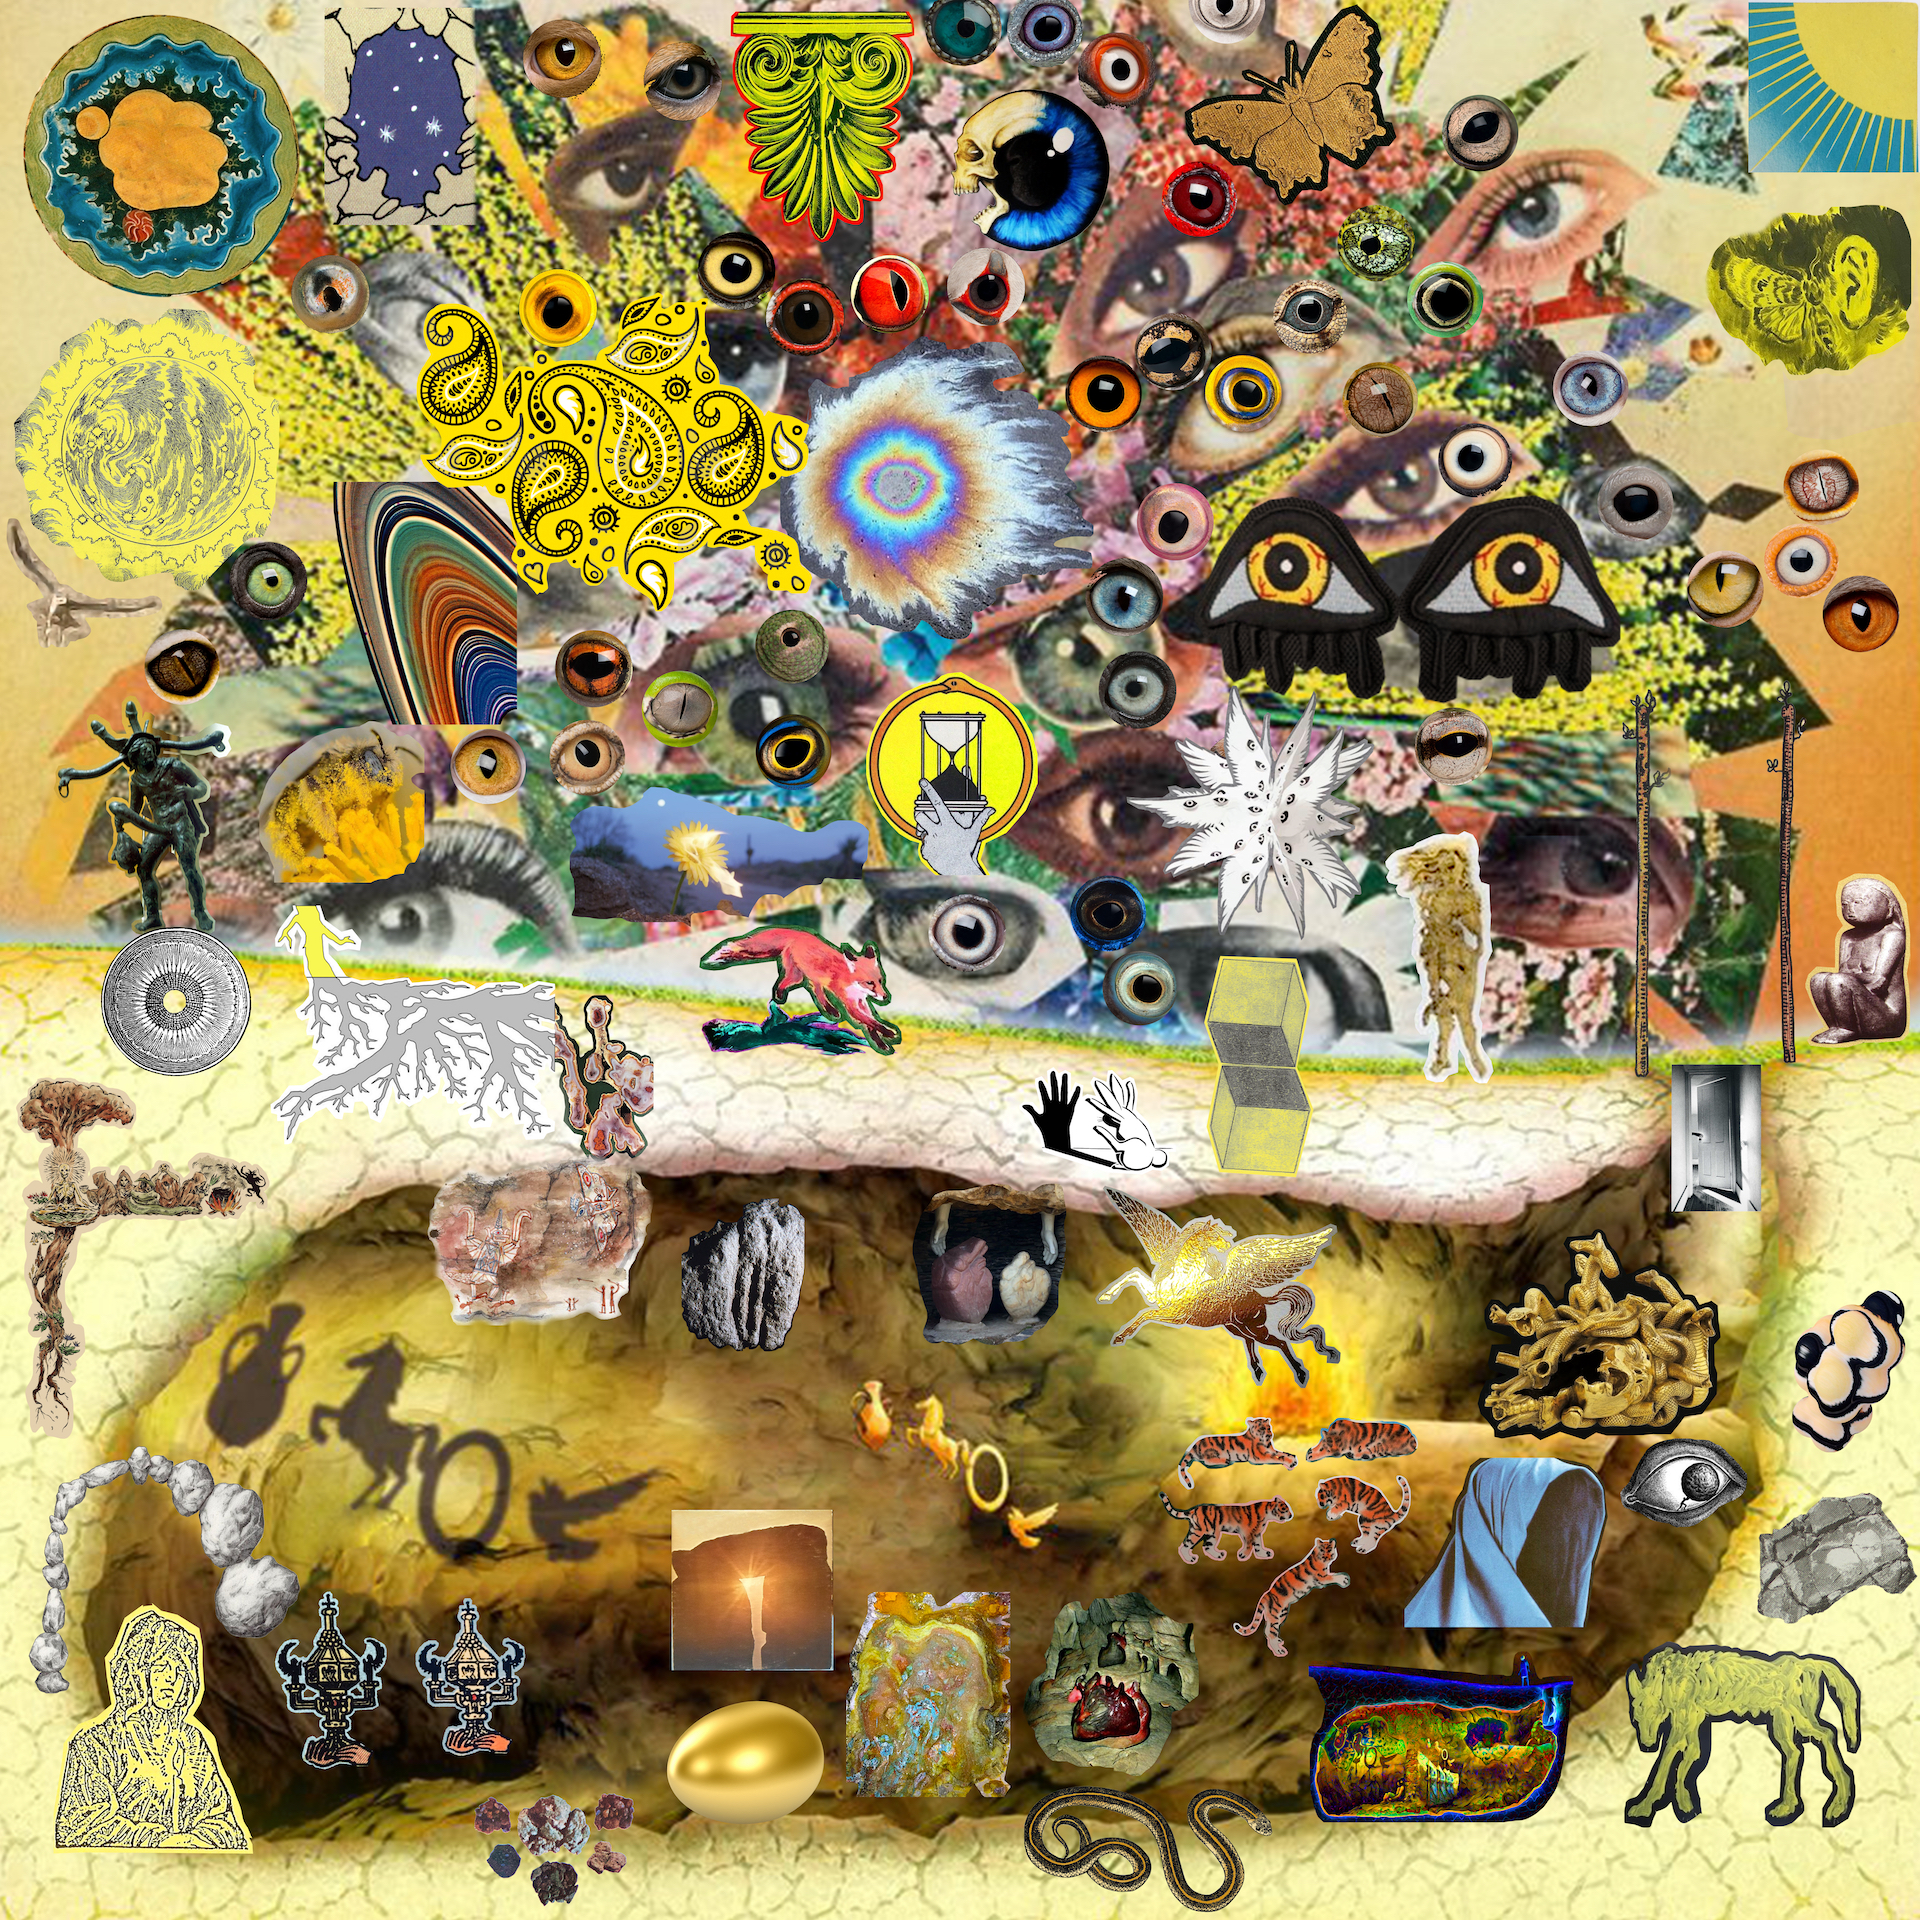 bouquet of eyes cave formerly known as plato's cover collage yellow